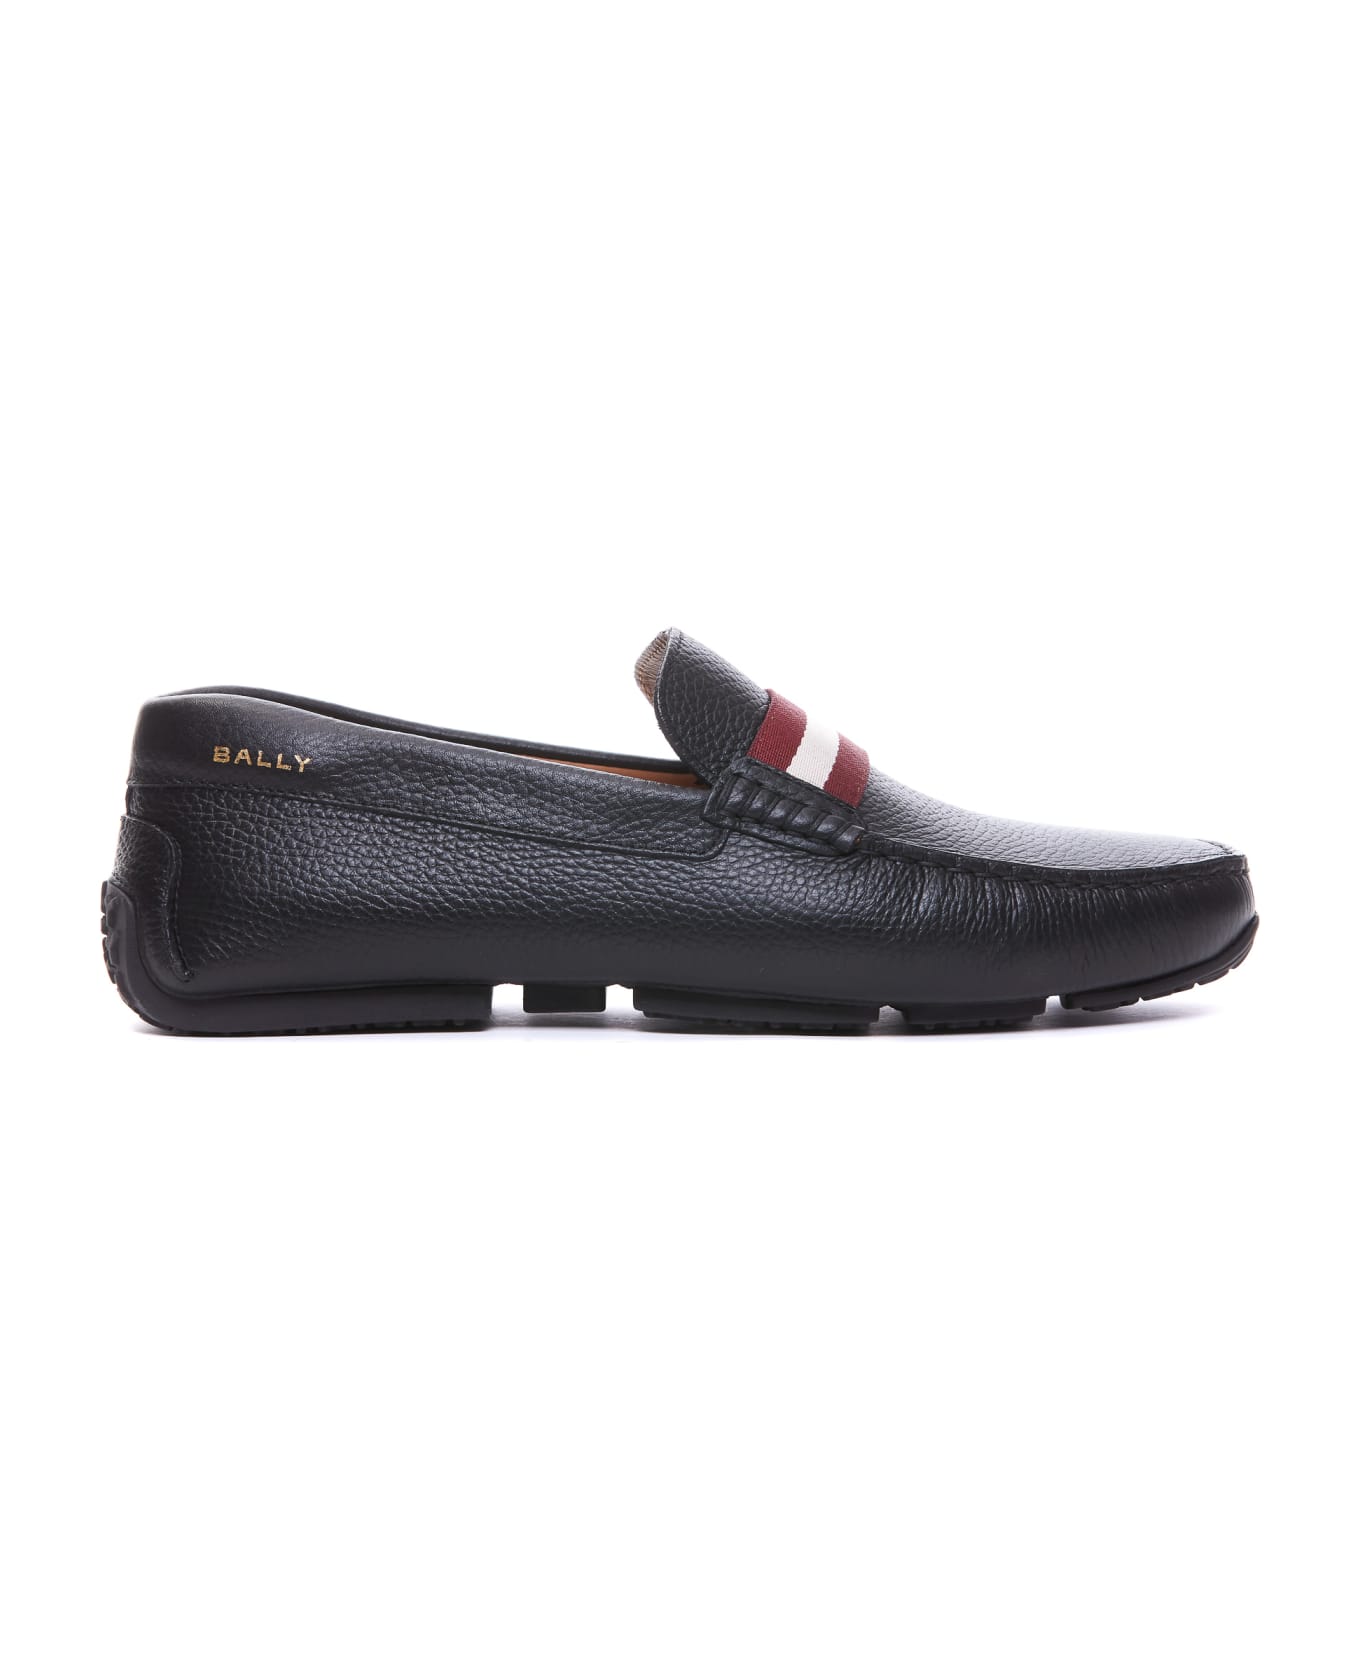 Bally Perthy Loafers - Black